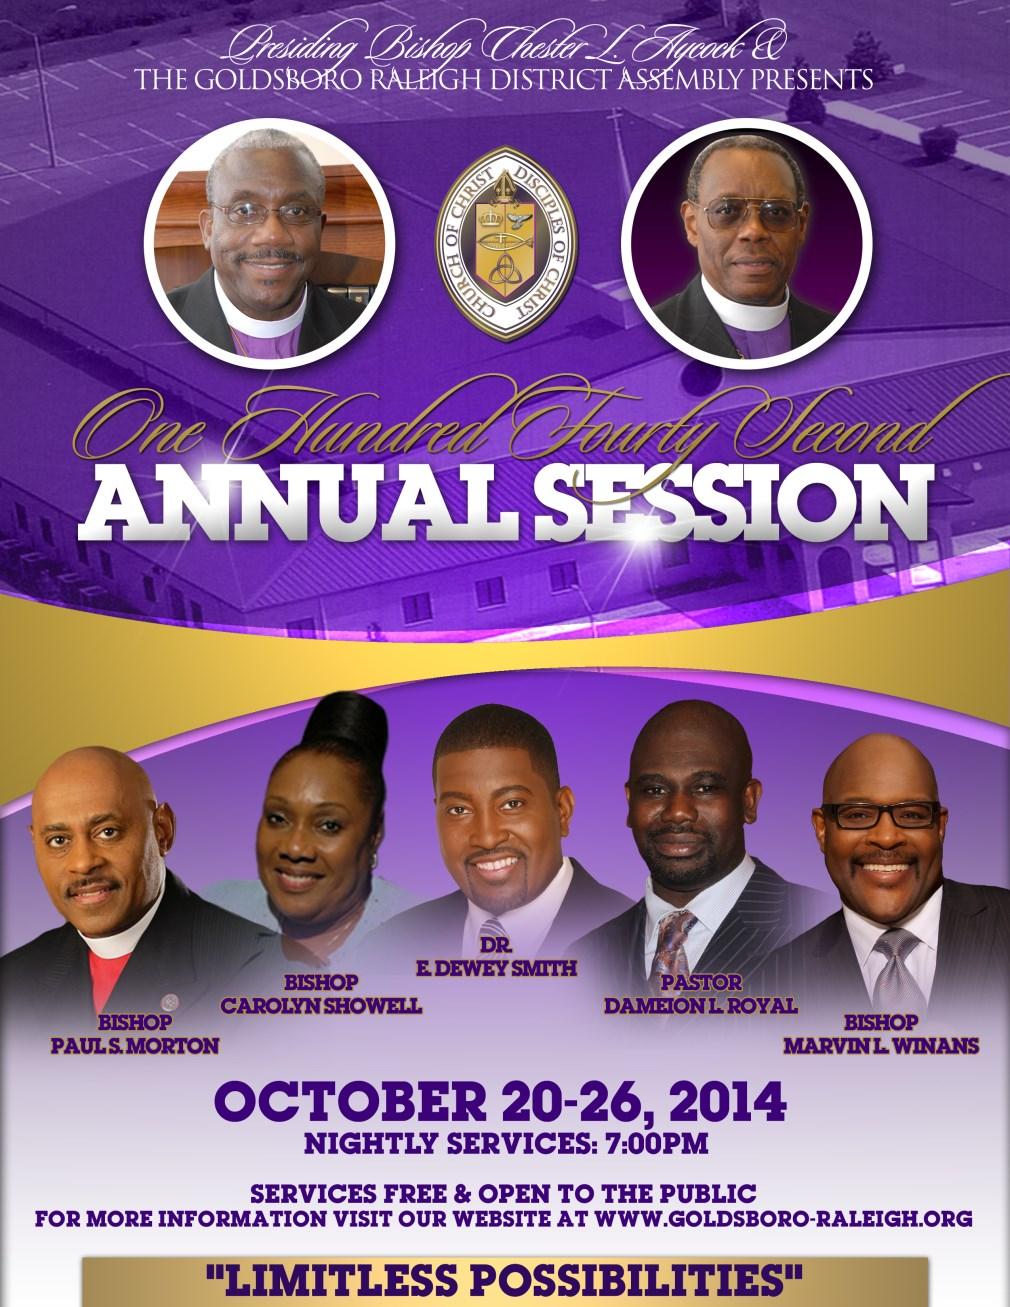 org First I Last Name Day Phone Evening Phone Email Congregation Assembly Affiliation Pastor/Bishop Pre-Registration Ends October 20, 2014 TAKE ADVANTAGE OF THE SAVINGS!